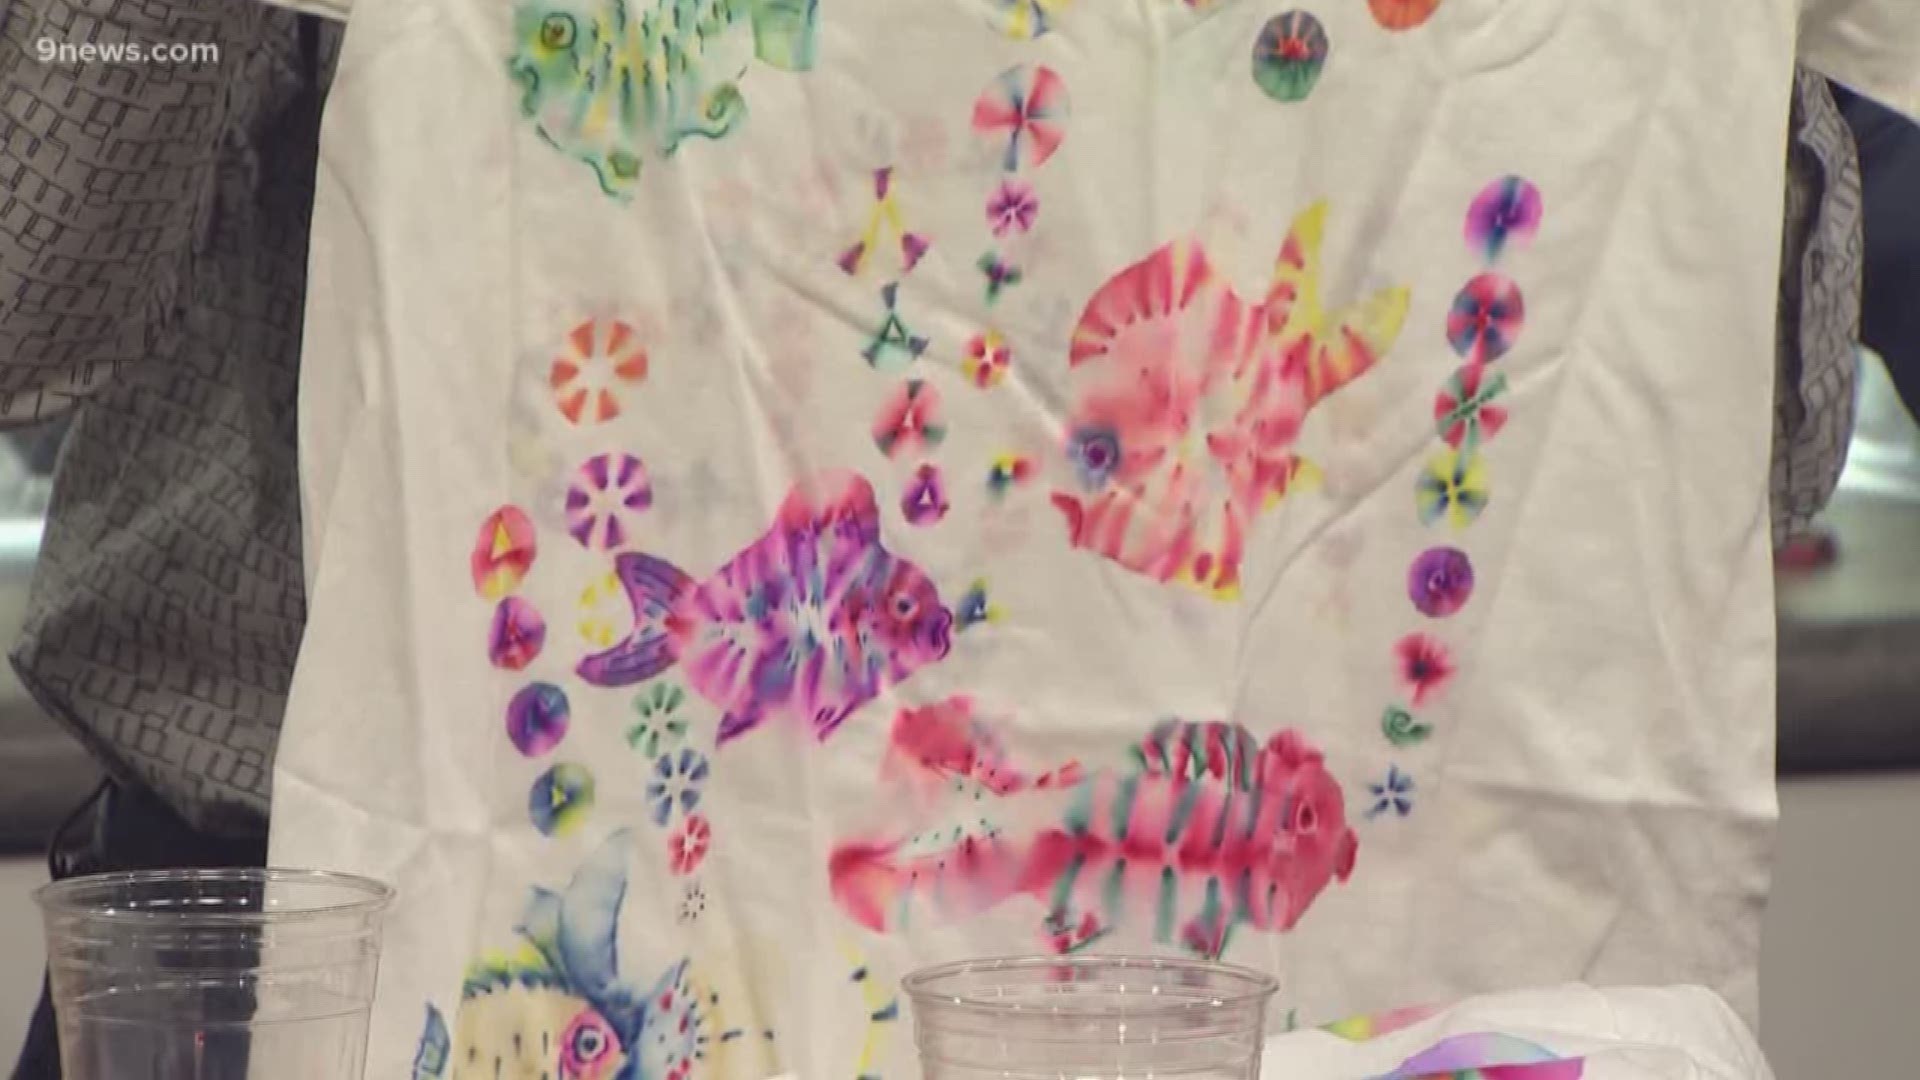 Traditional tie-dye looks cool, but it can be a real mess. Science Guy Steve Spangler has a creative solution to combine art and science and keep the kids busy all at the same time.